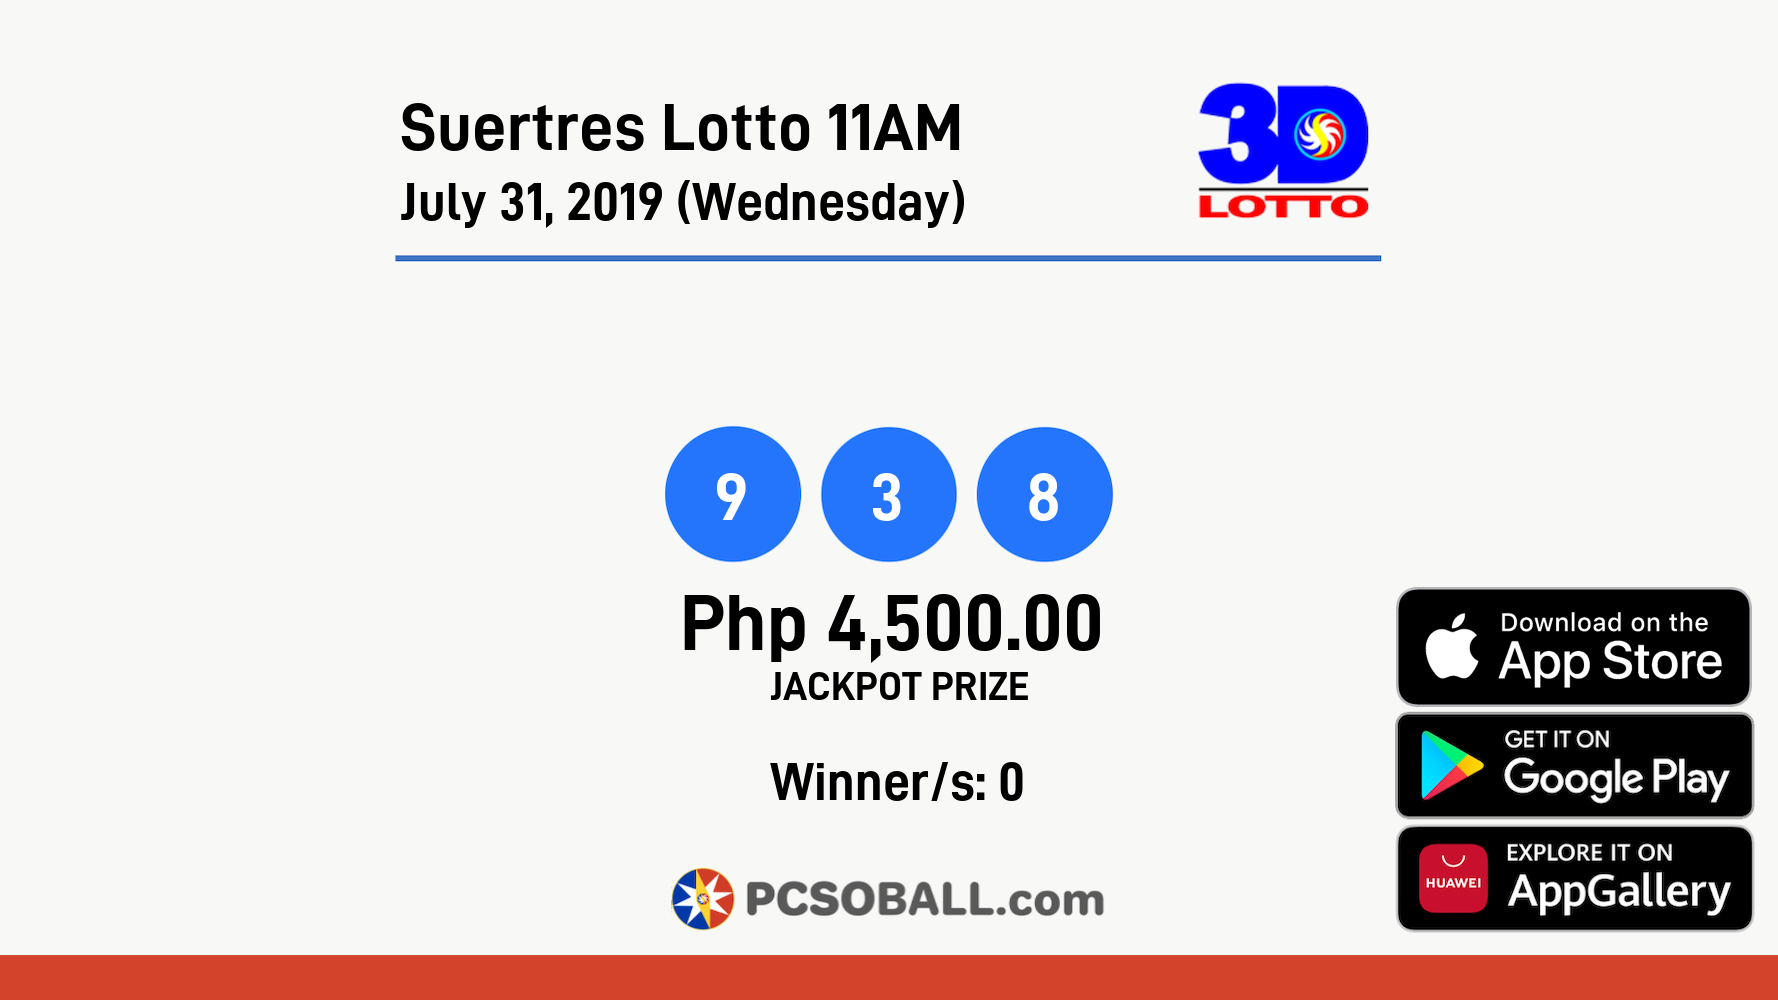 Suertres Lotto 11AM July 31, 2019 (Wednesday) Result